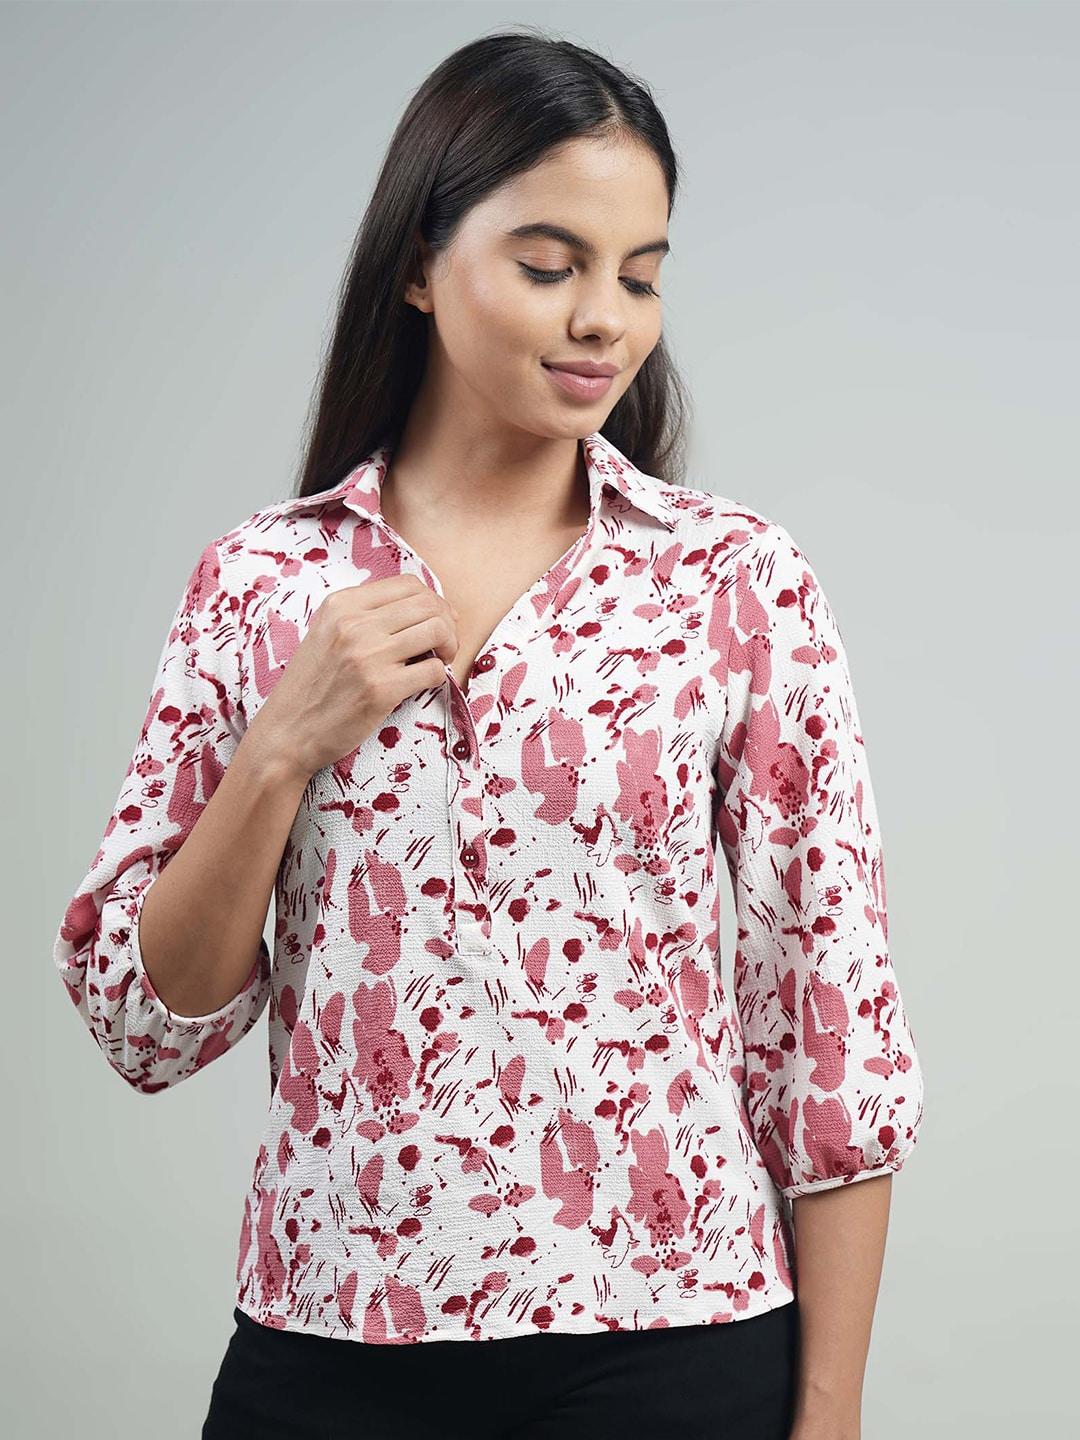 IDK Abstract Printed Puff Sleeves Shirt Style Top